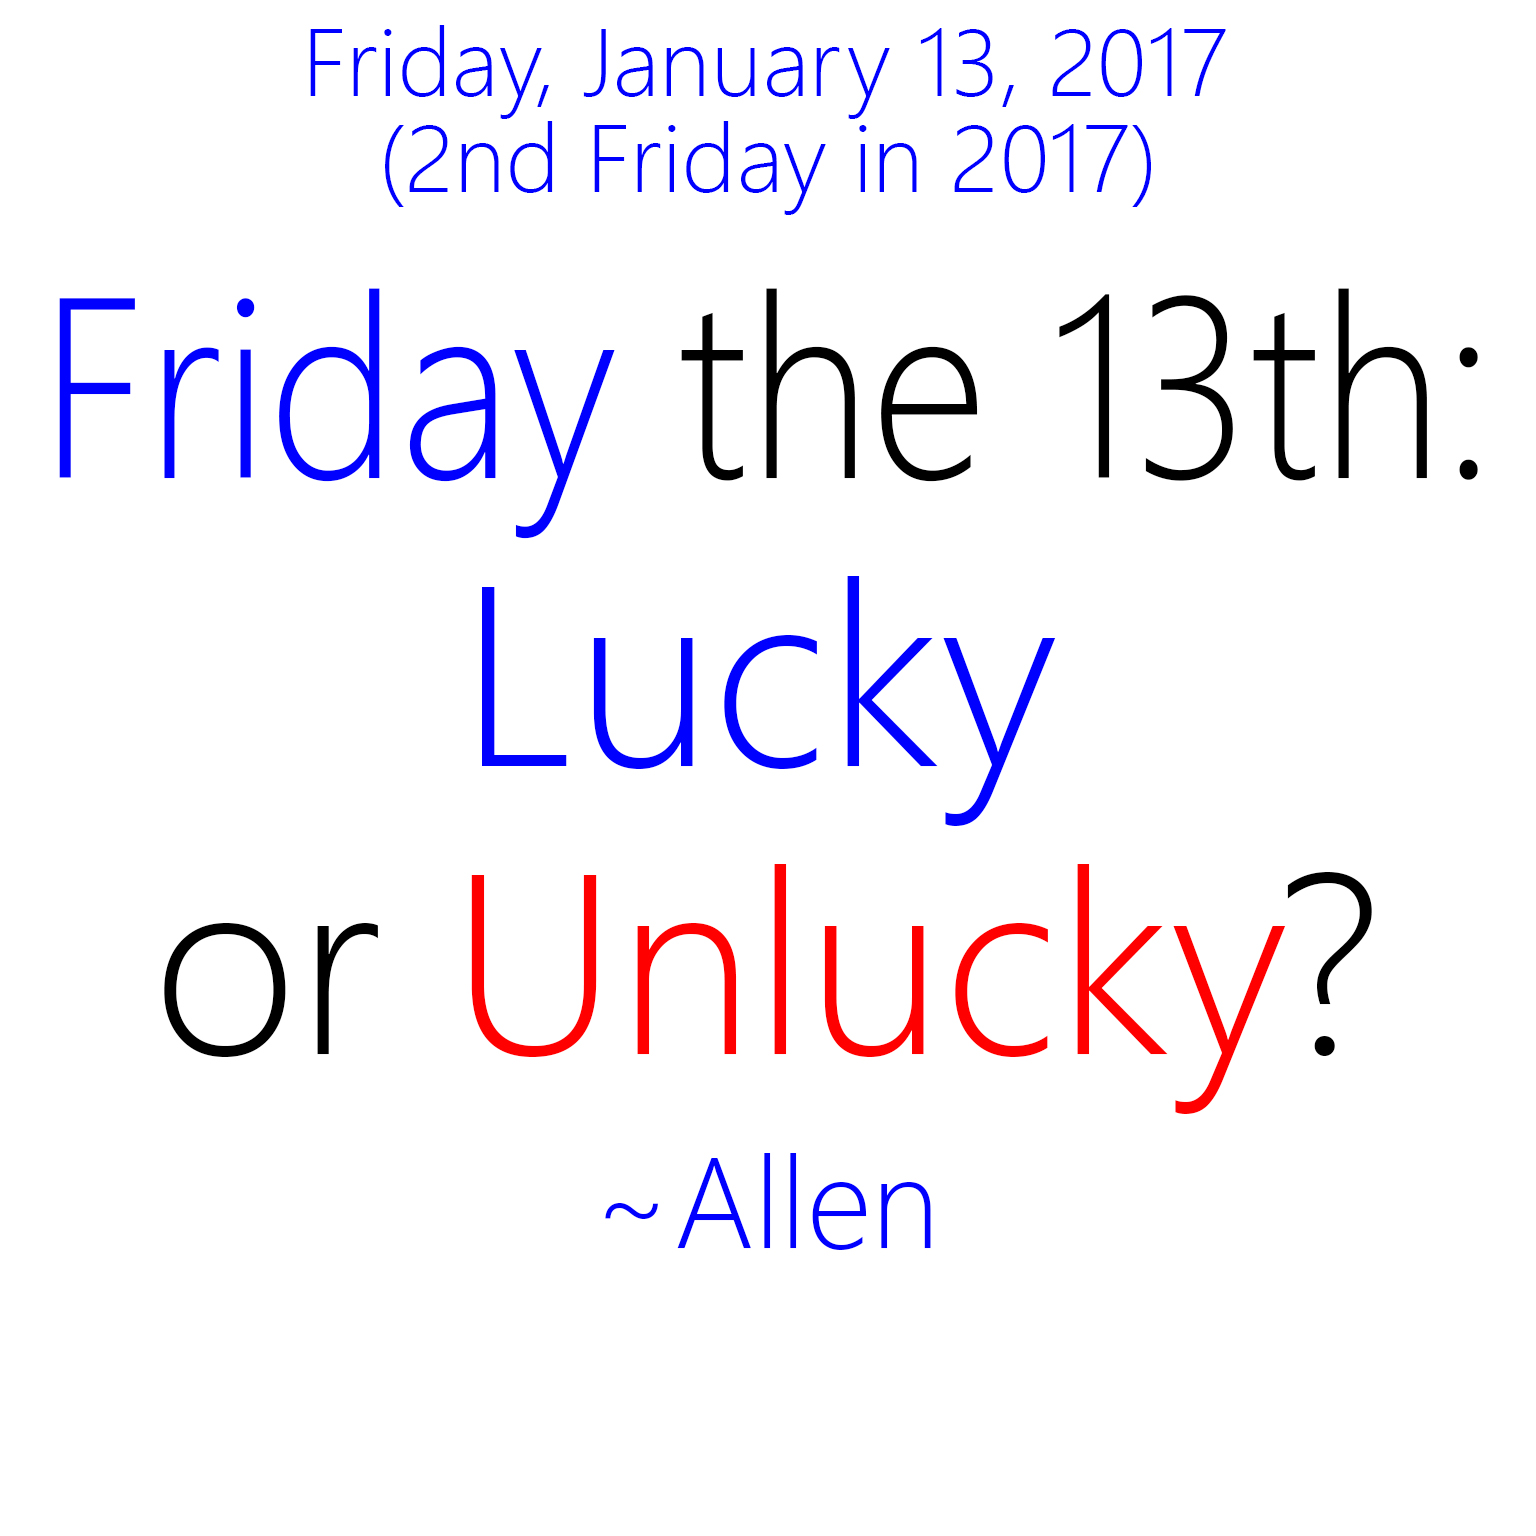 1_13_2017___friday_the_13th__lucky_or_unlucky__by_allenacnguyen-davb2i0.jpg